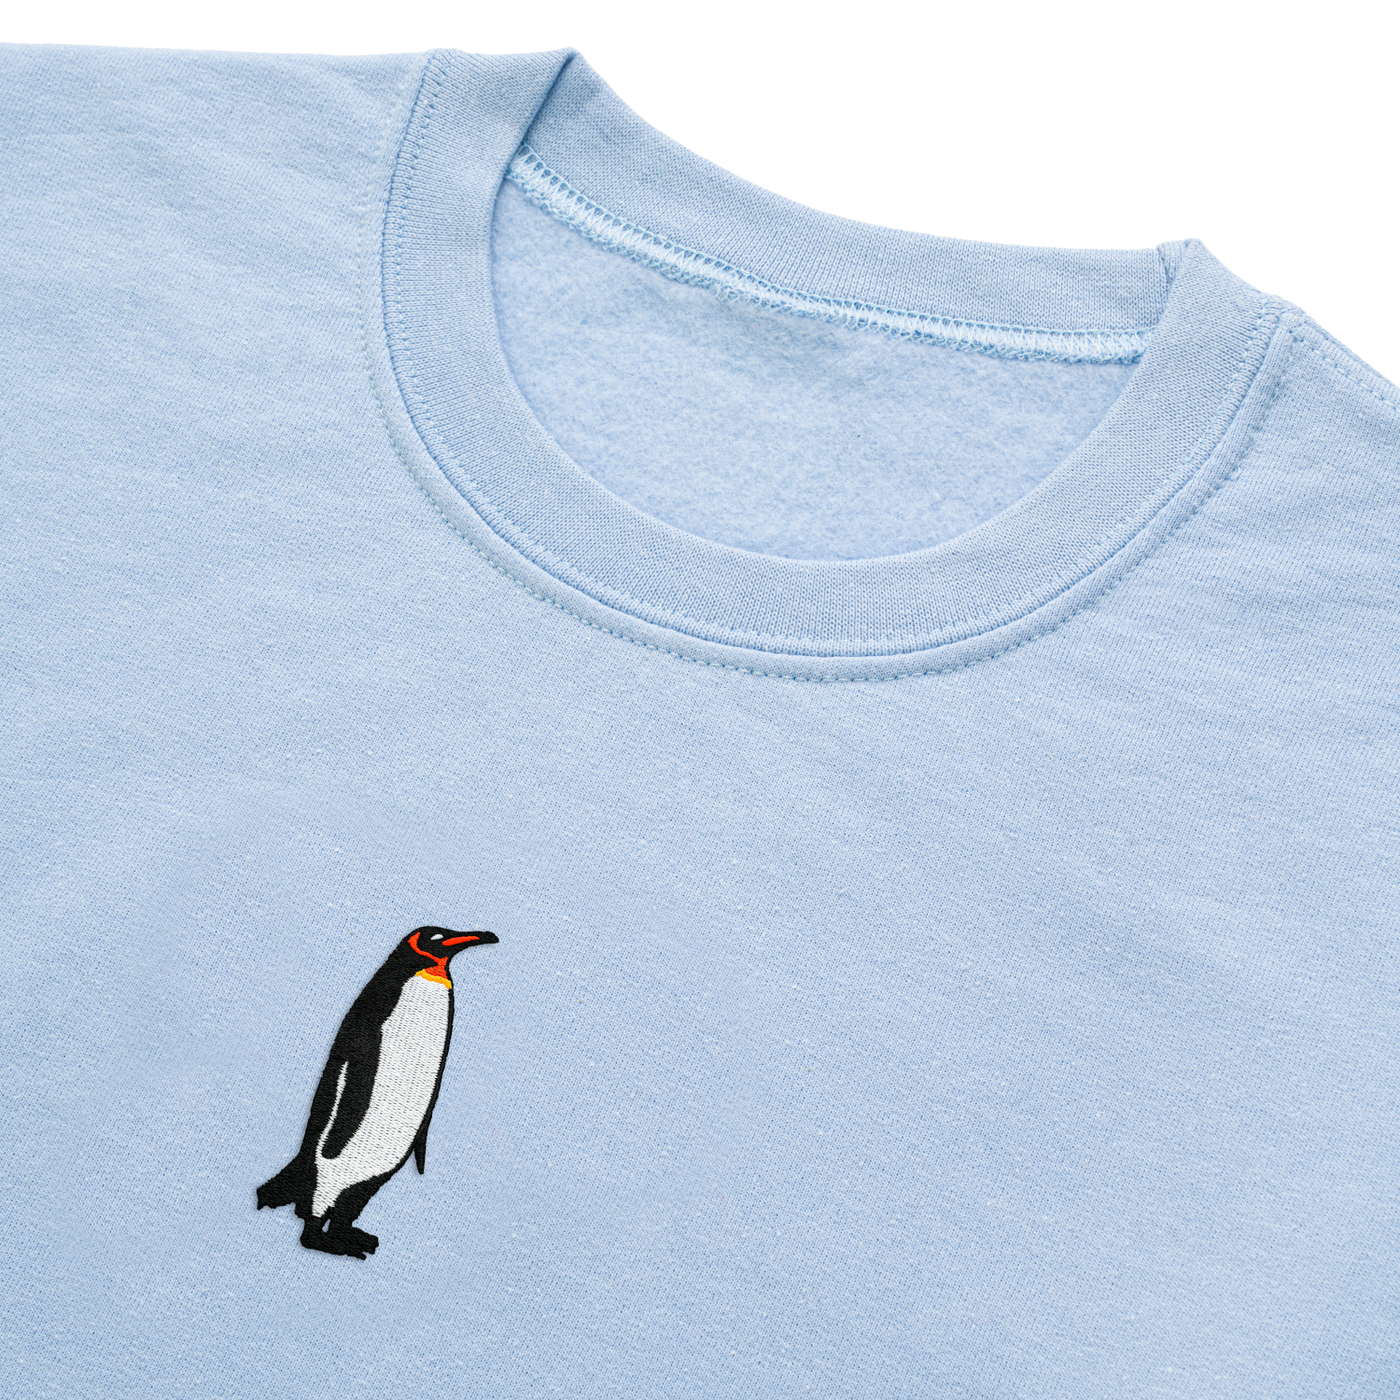 Bobby's Planet Women's Embroidered Penguin Sweatshirt from Arctic Polar Animals Collection in Light Blue Color#color_light-blue